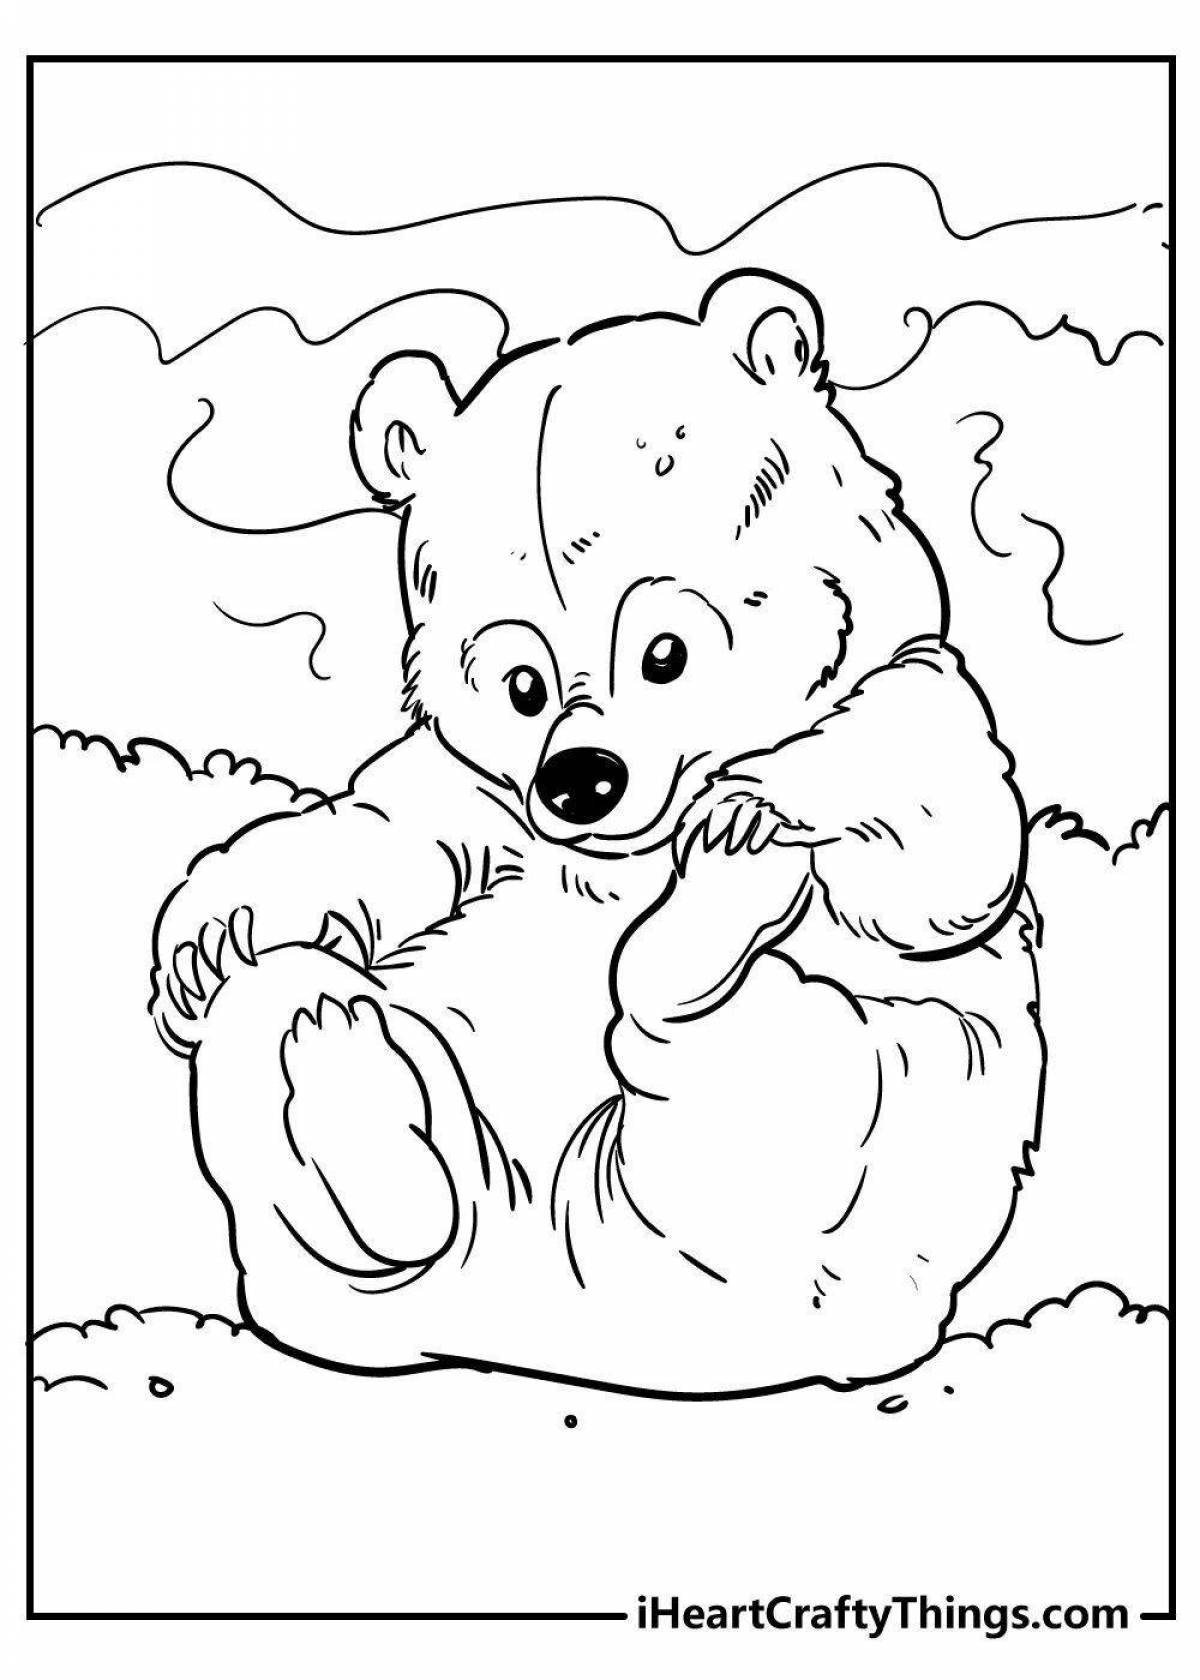 Colouring bright northern bear